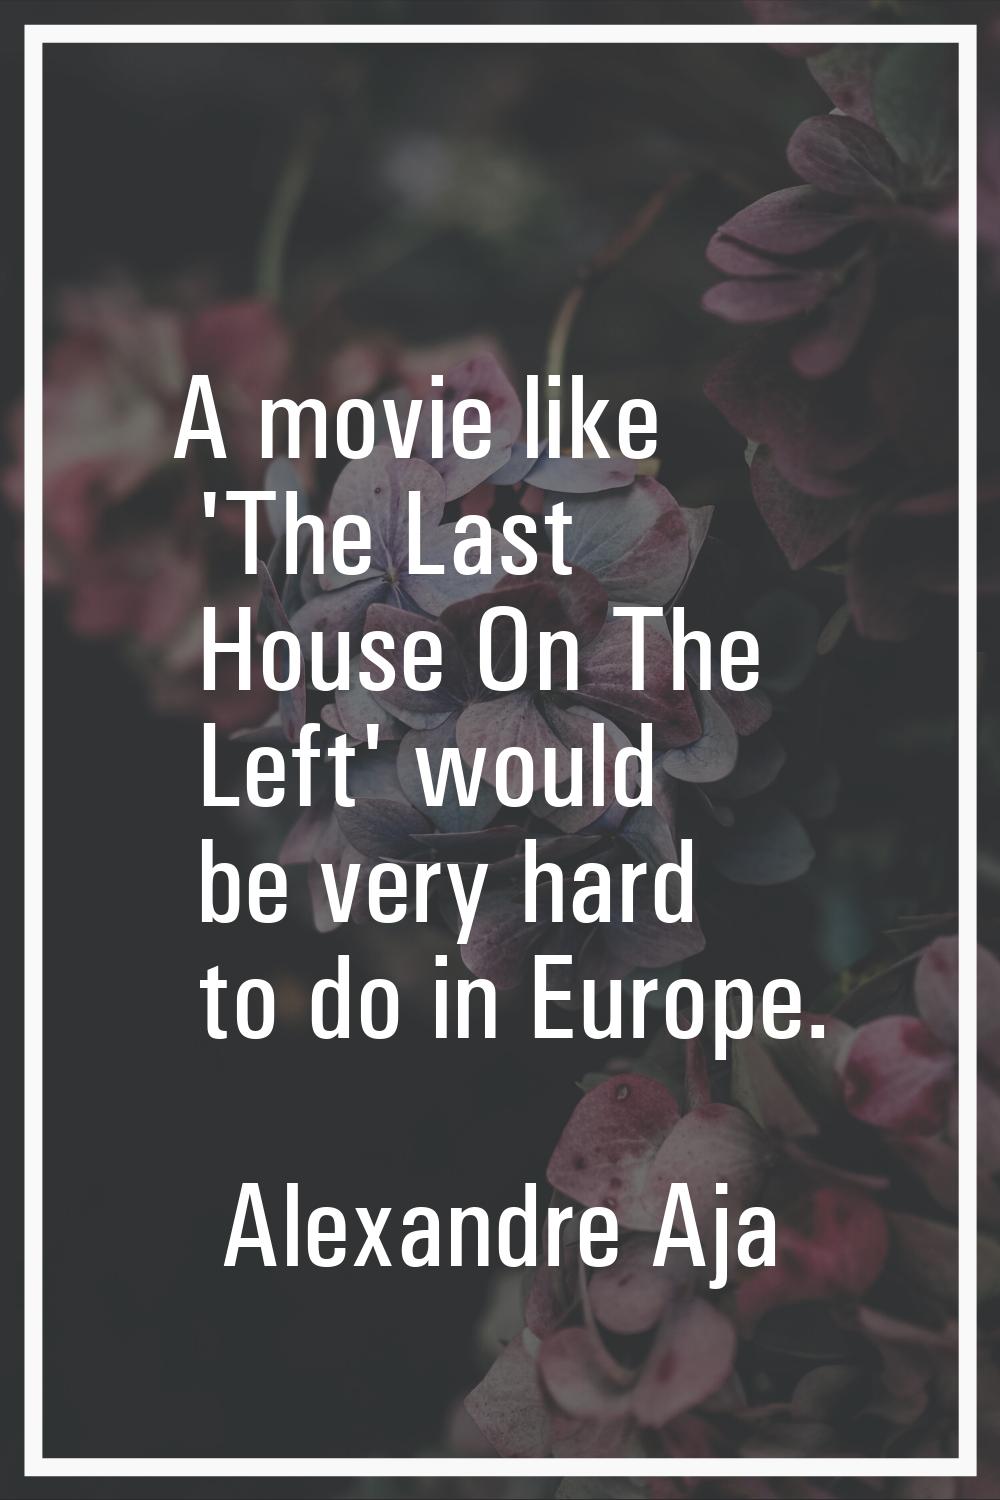 A movie like 'The Last House On The Left' would be very hard to do in Europe.